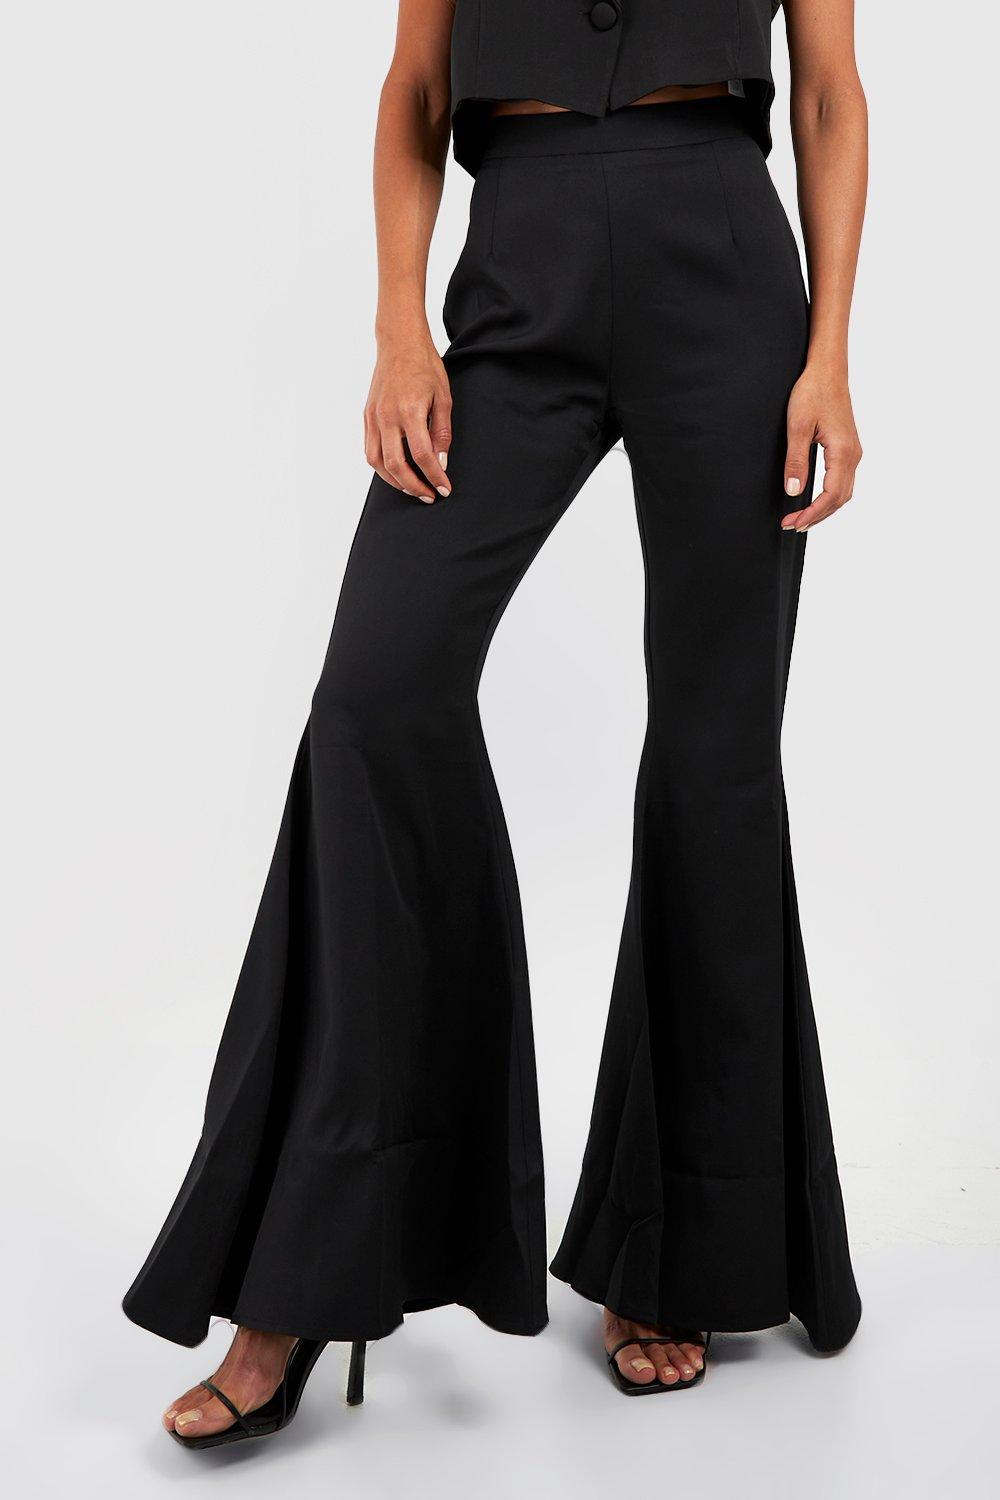 Black Woven High Waisted Flared Pants